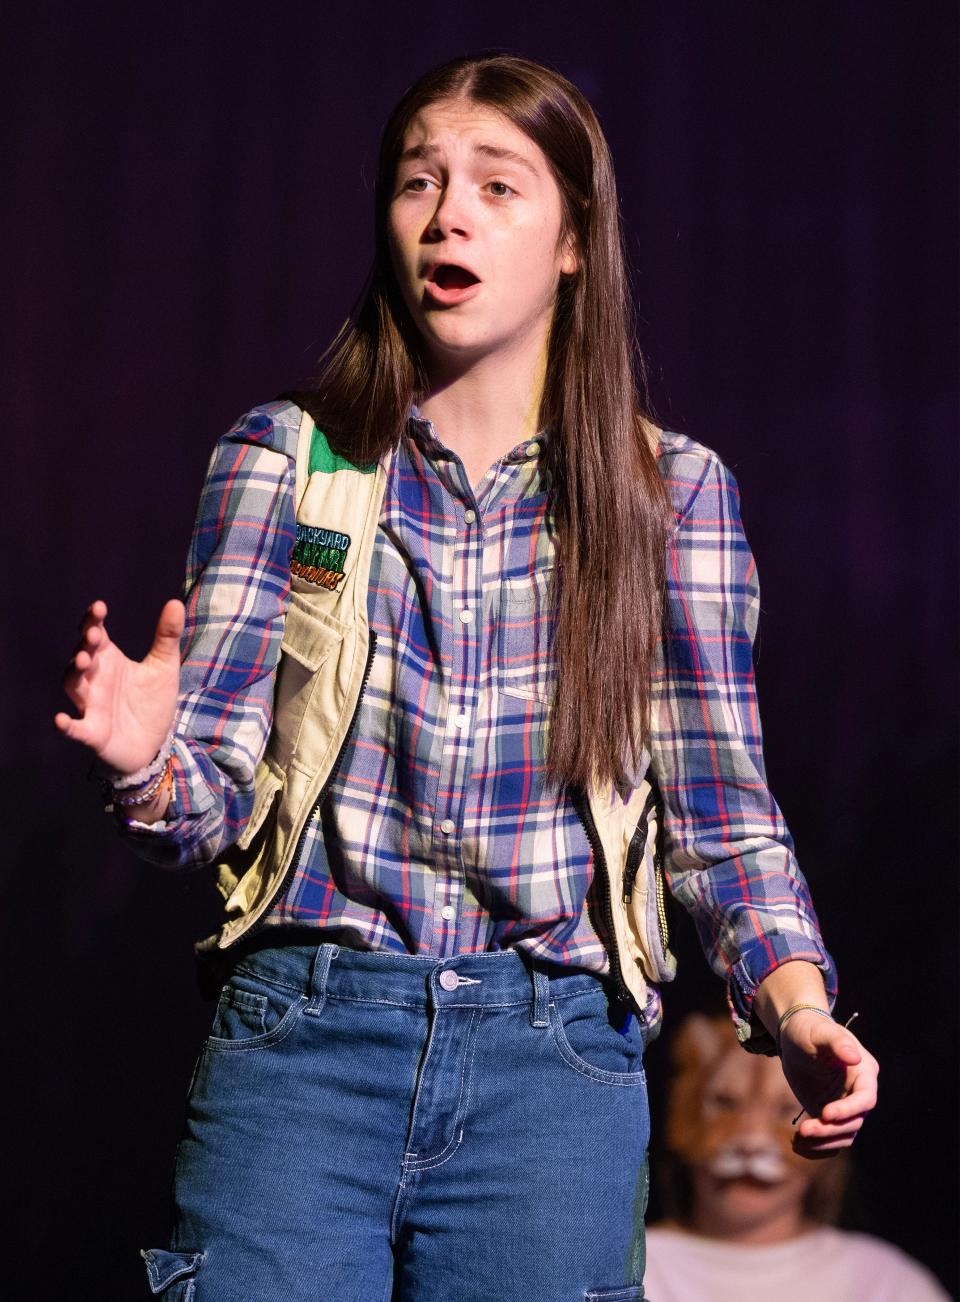 Molly Maltempi portrays Cady and sings a song during a recent rehearsal of "Mean Girls," a musical based on the popular 2004 teen movie.  The North Canton Playhouse is presenting the production starting this weekend.